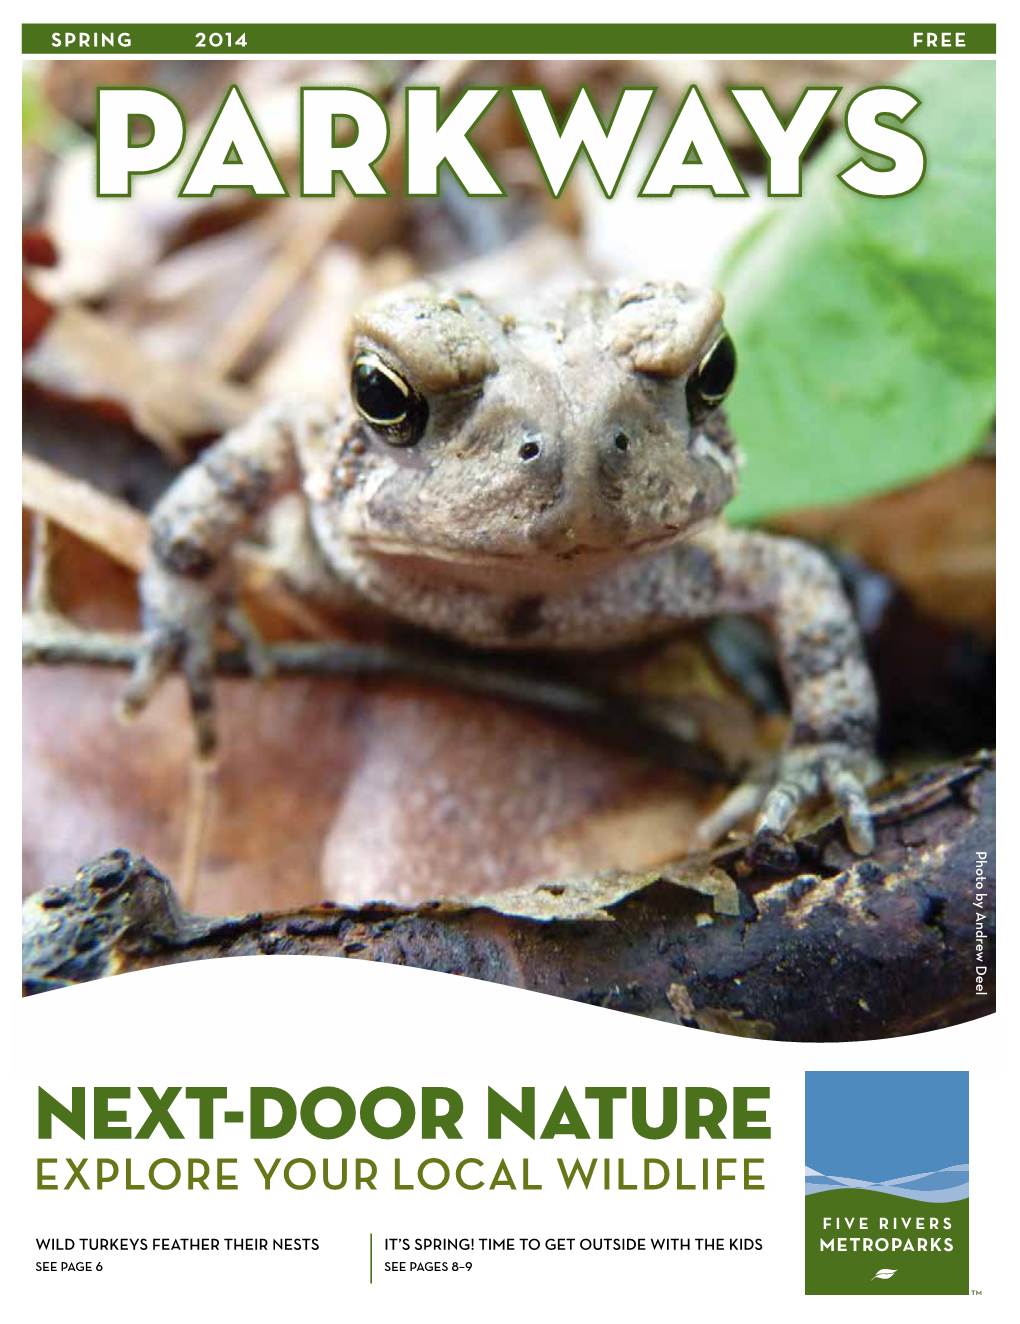 Spring 2014 FREE Parkways P Hoto by a Ndre W D Eel Next-Door Nature Explore Your Local Wildlife